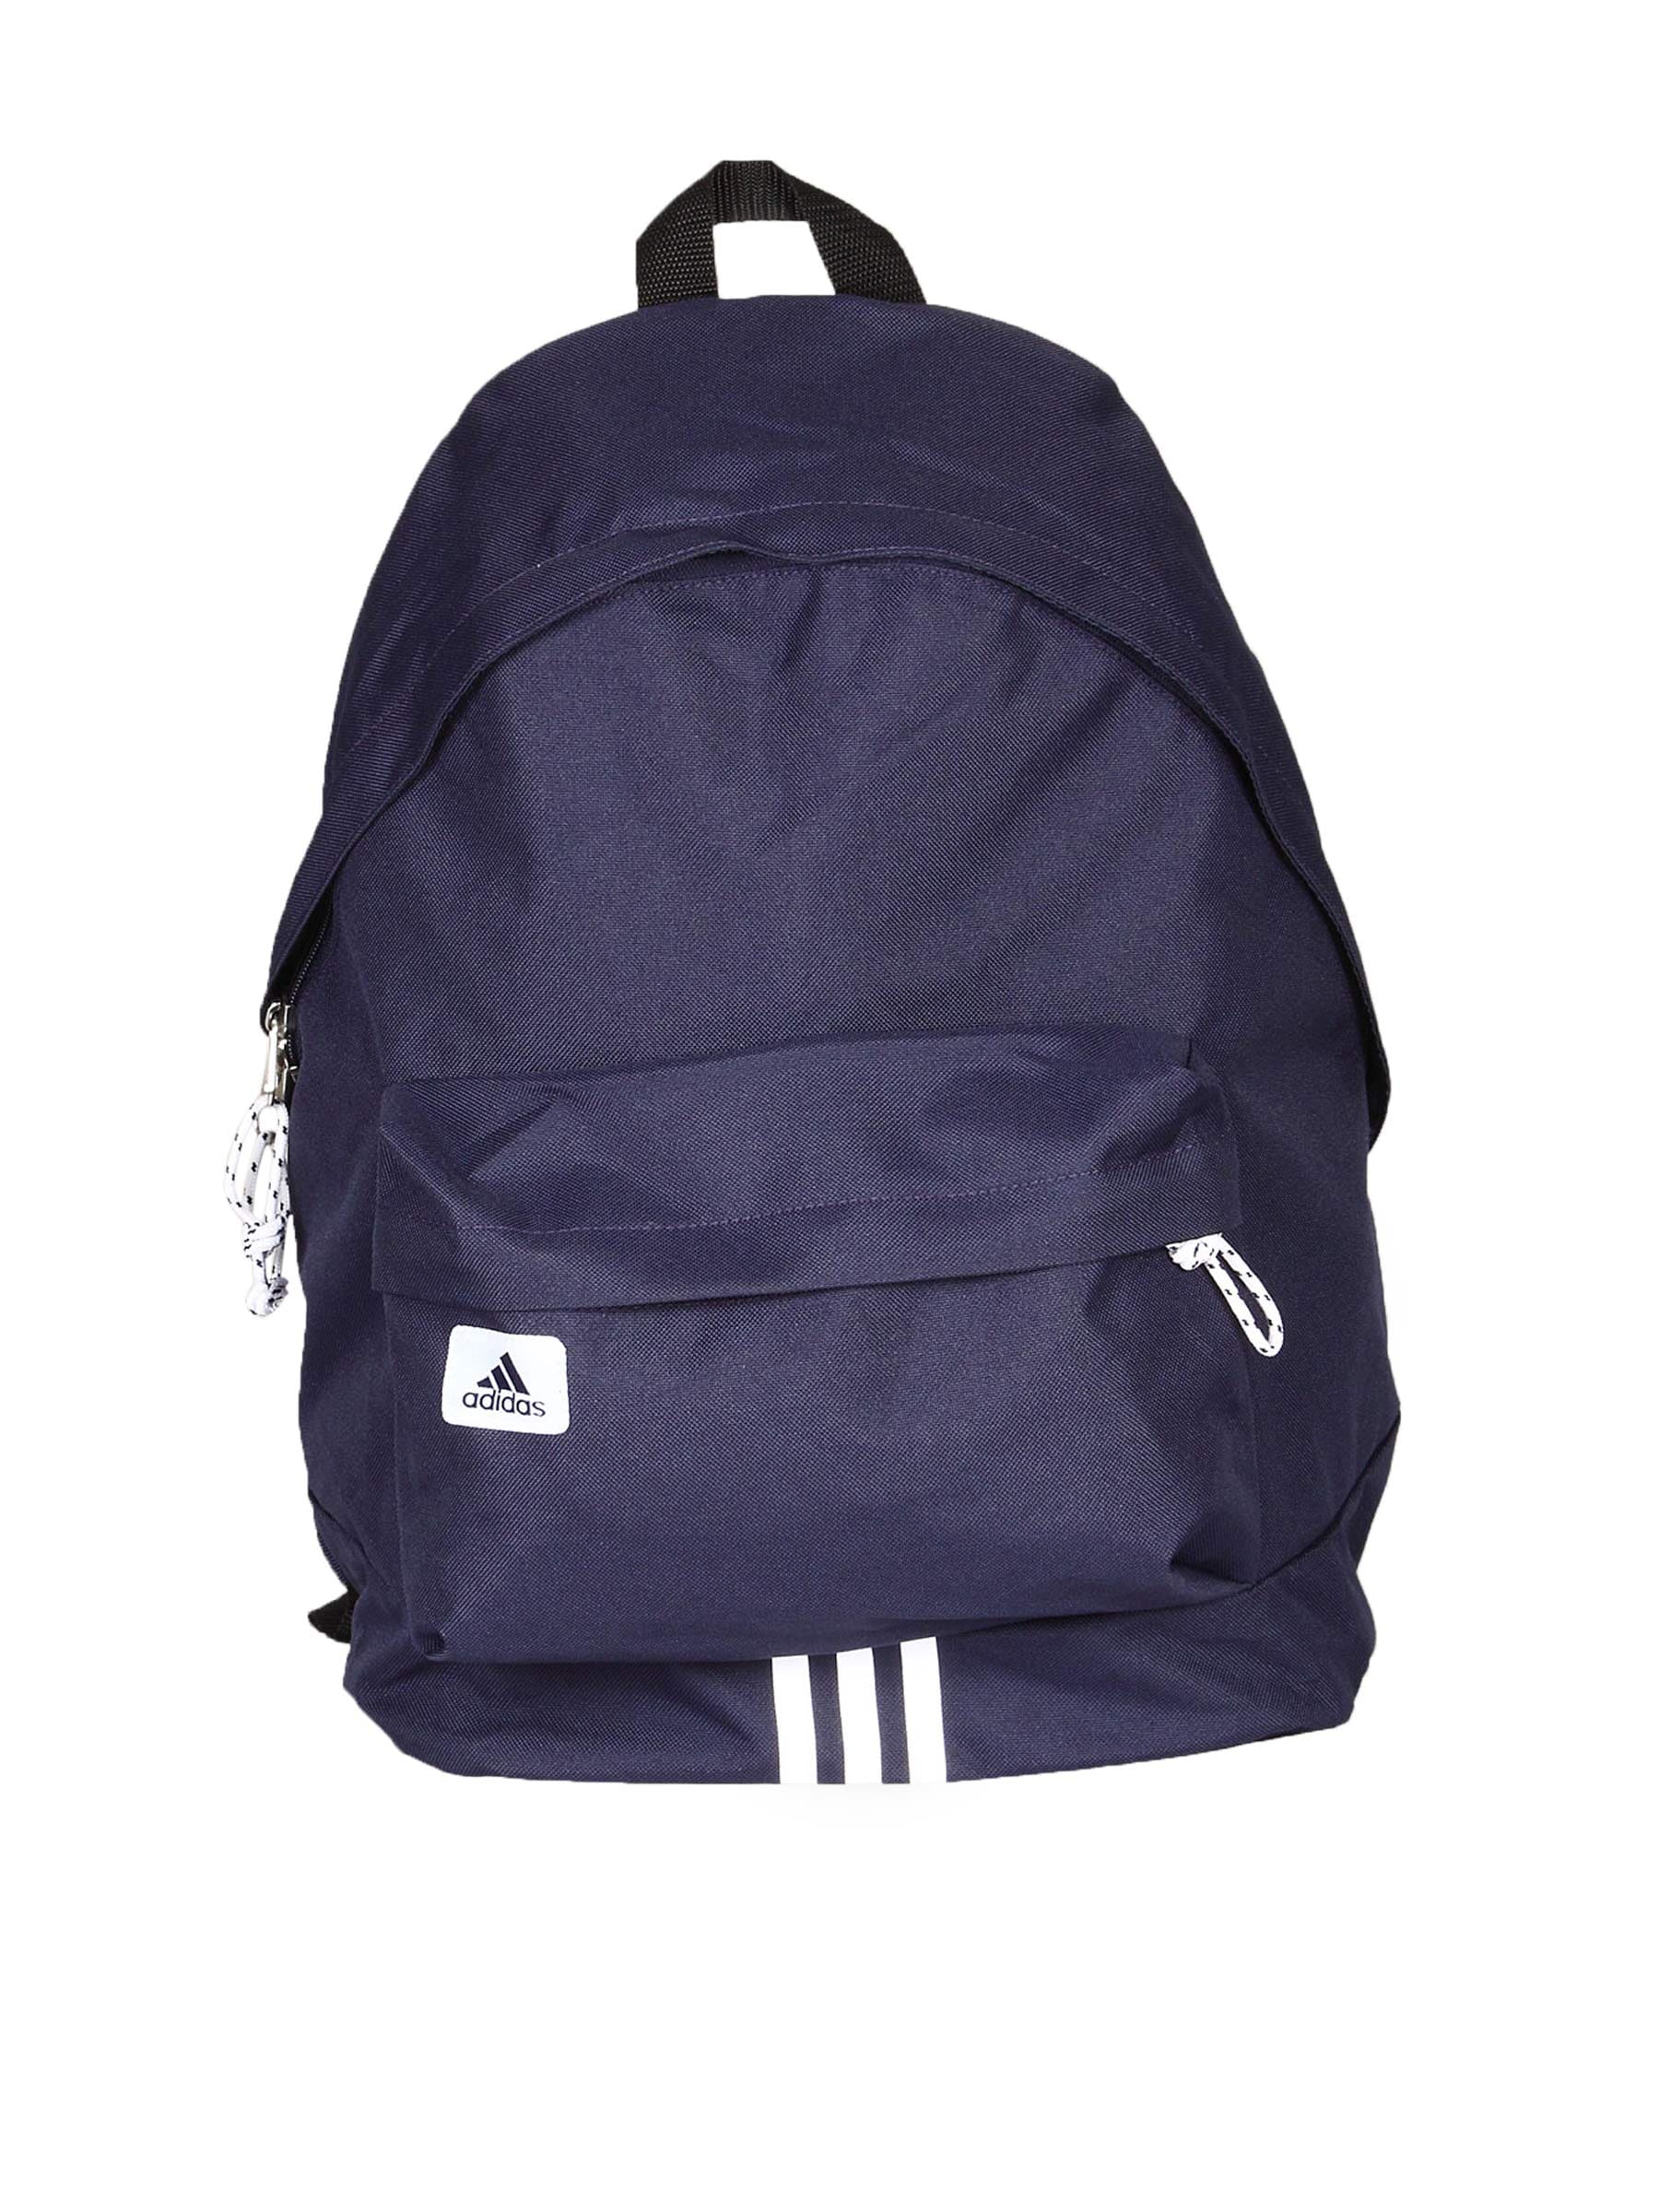 ADIDAS Classic Blue White Backpack